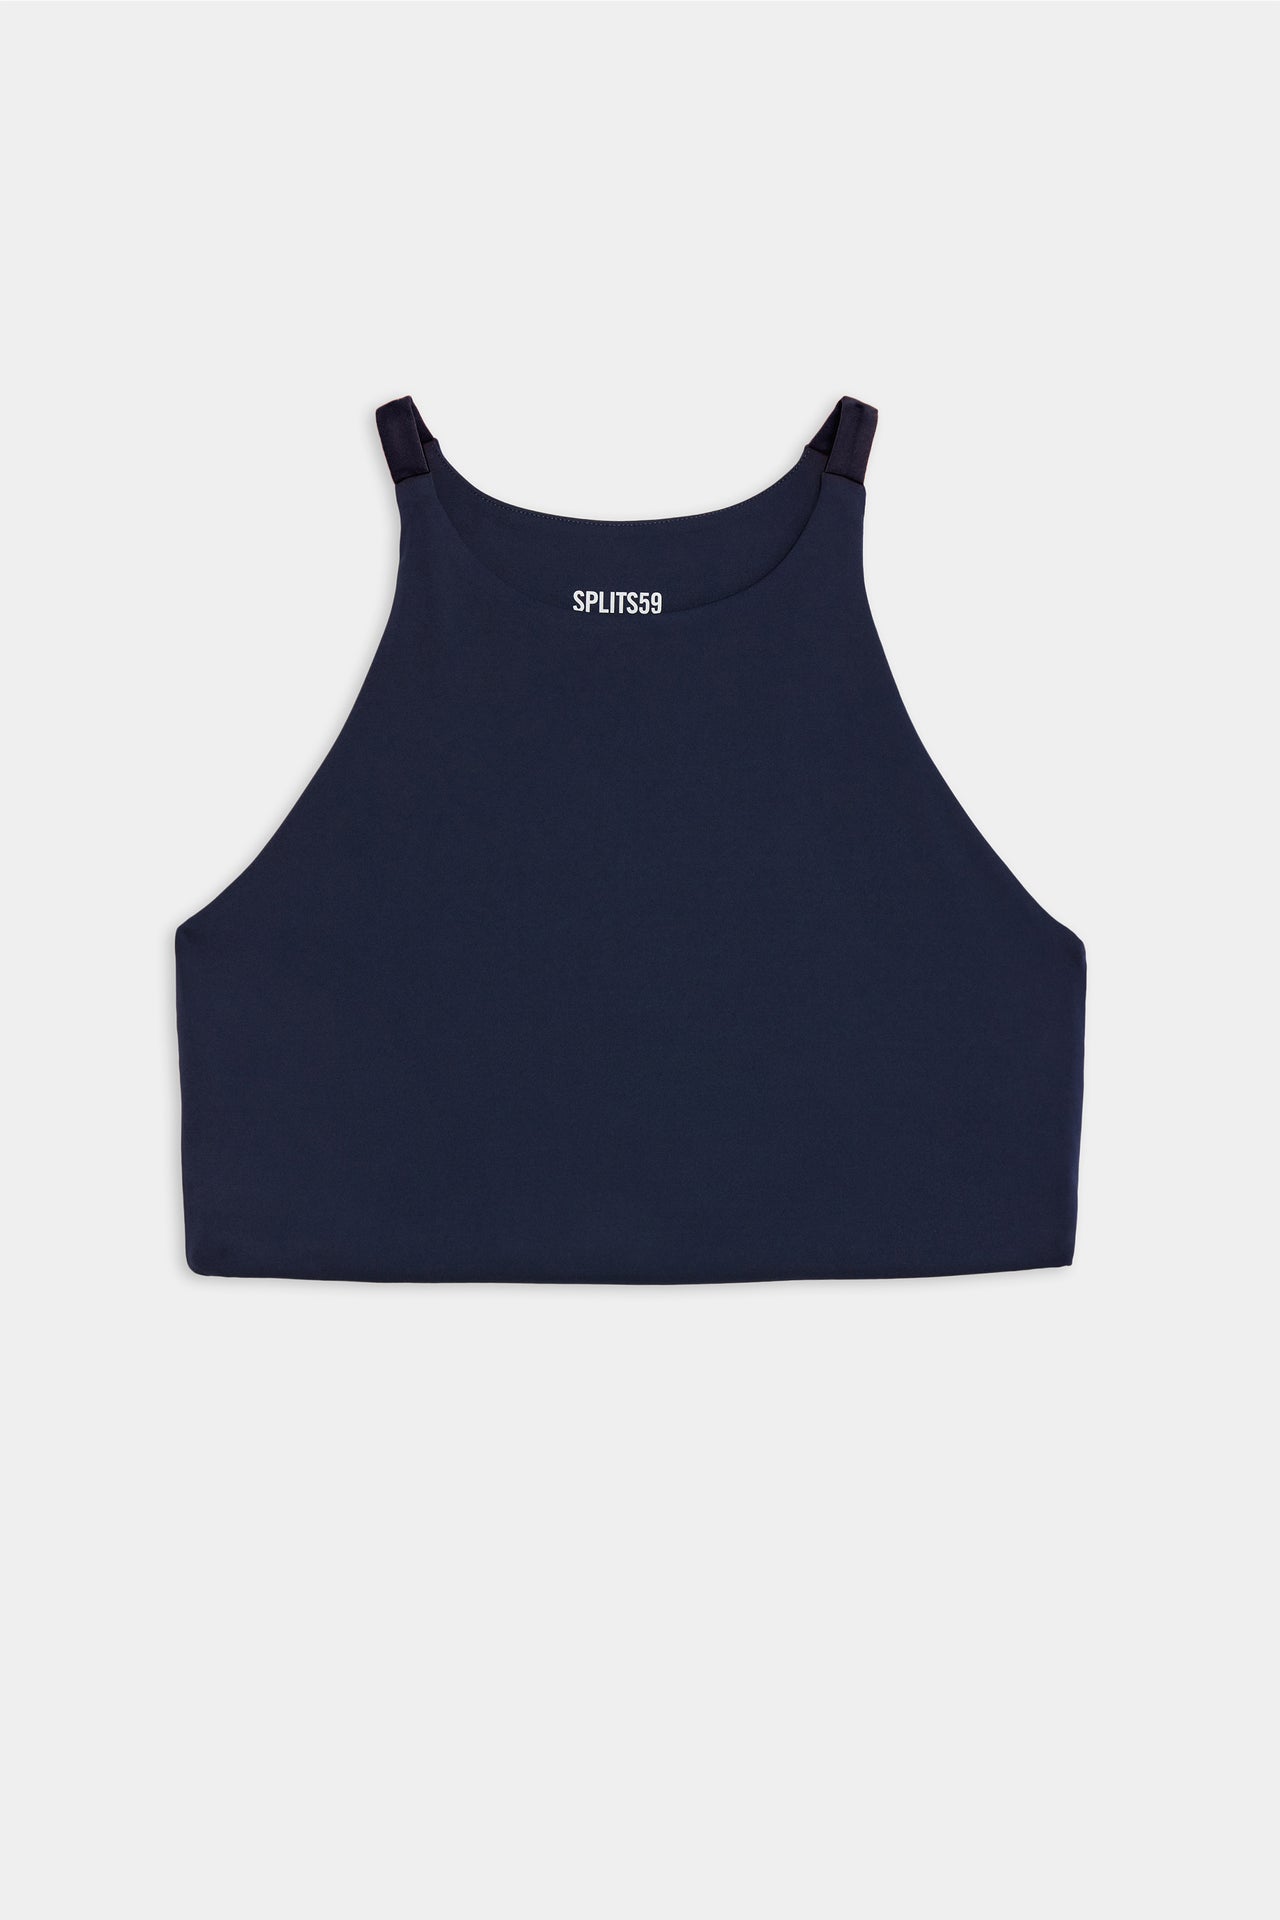 Flat view of dark blue sports bra that stops at collarbone